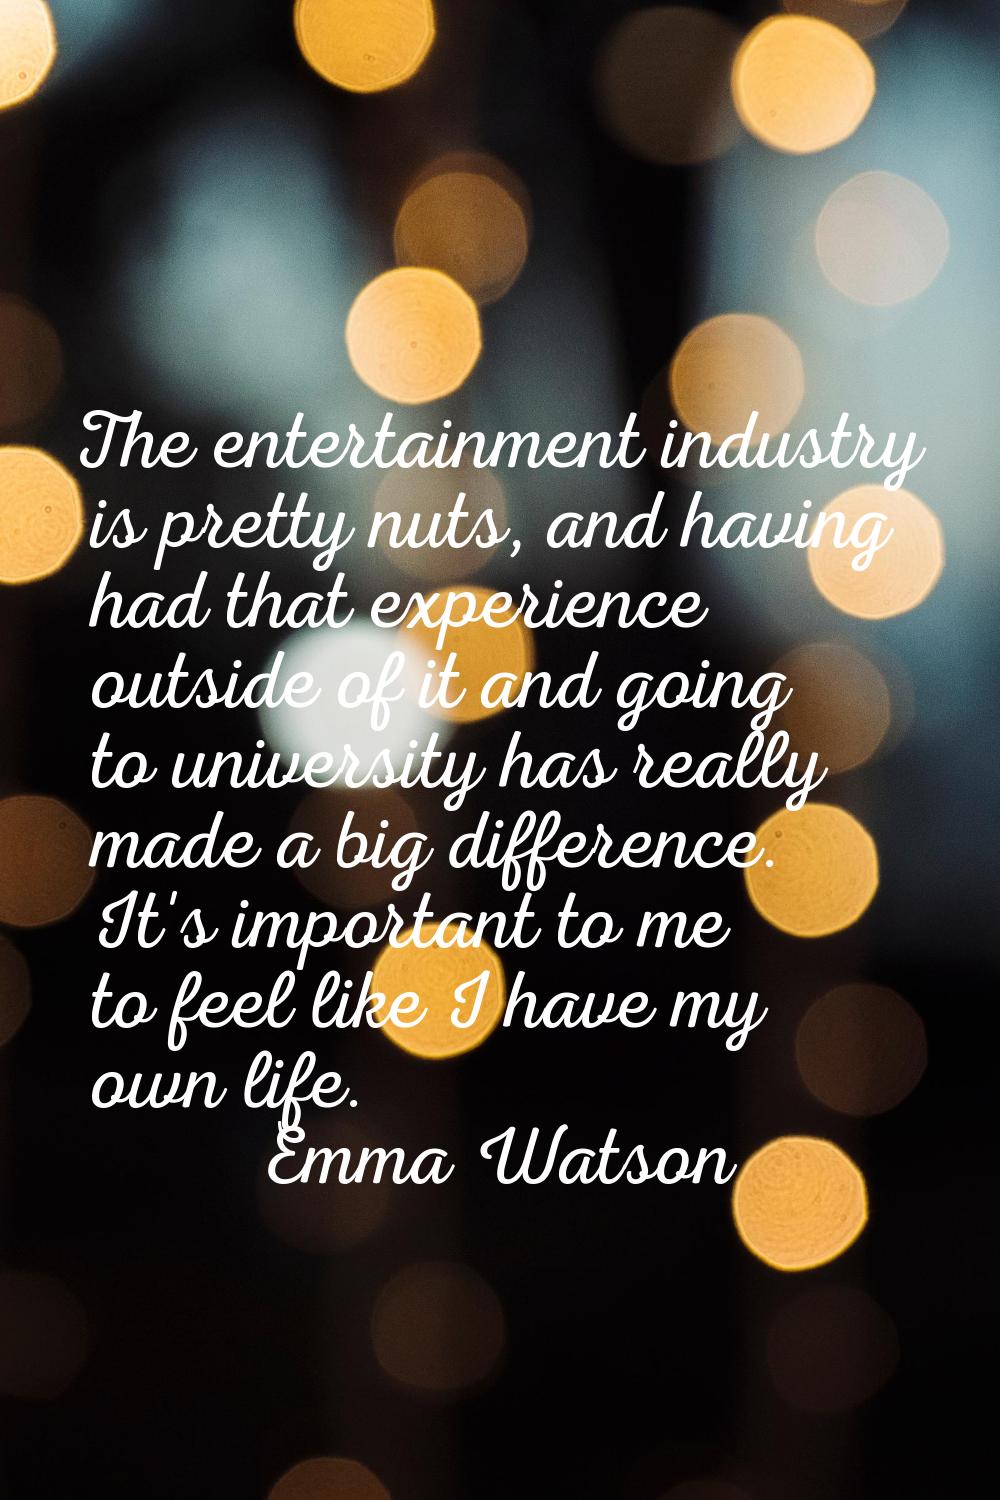 The entertainment industry is pretty nuts, and having had that experience outside of it and going t